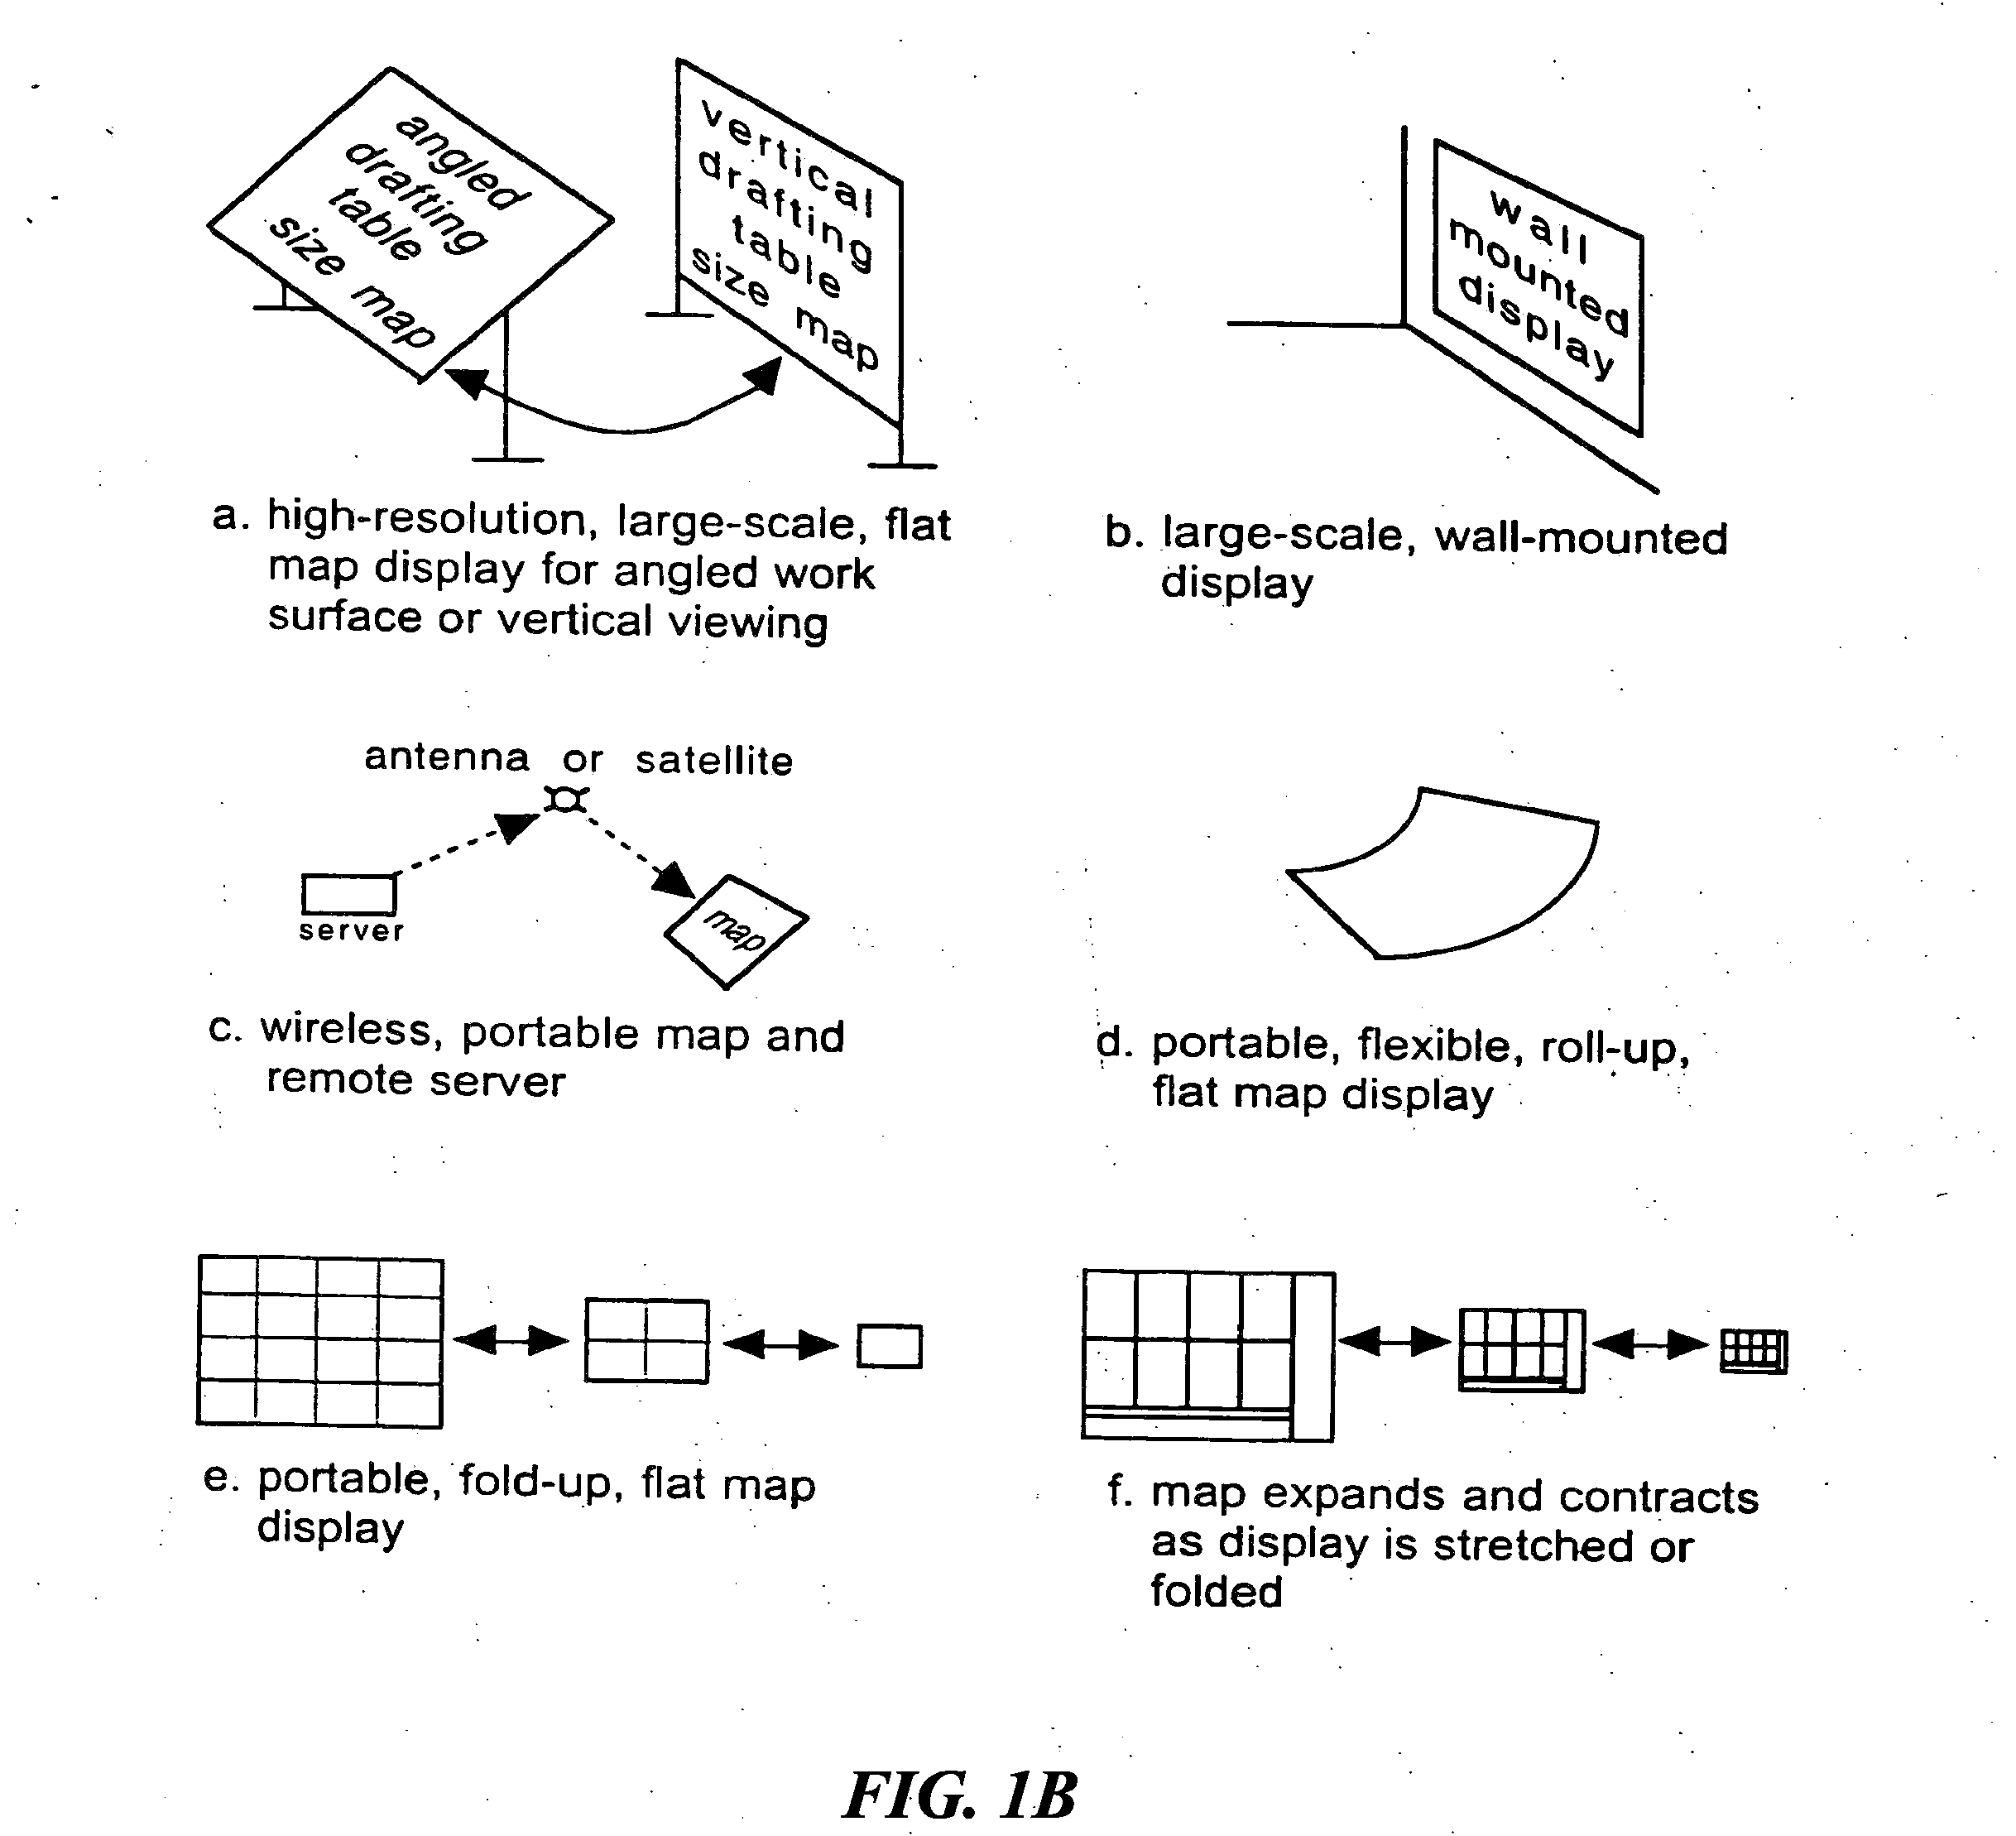 Graphic-information flow method and system for visually analyzing patterns and relationships